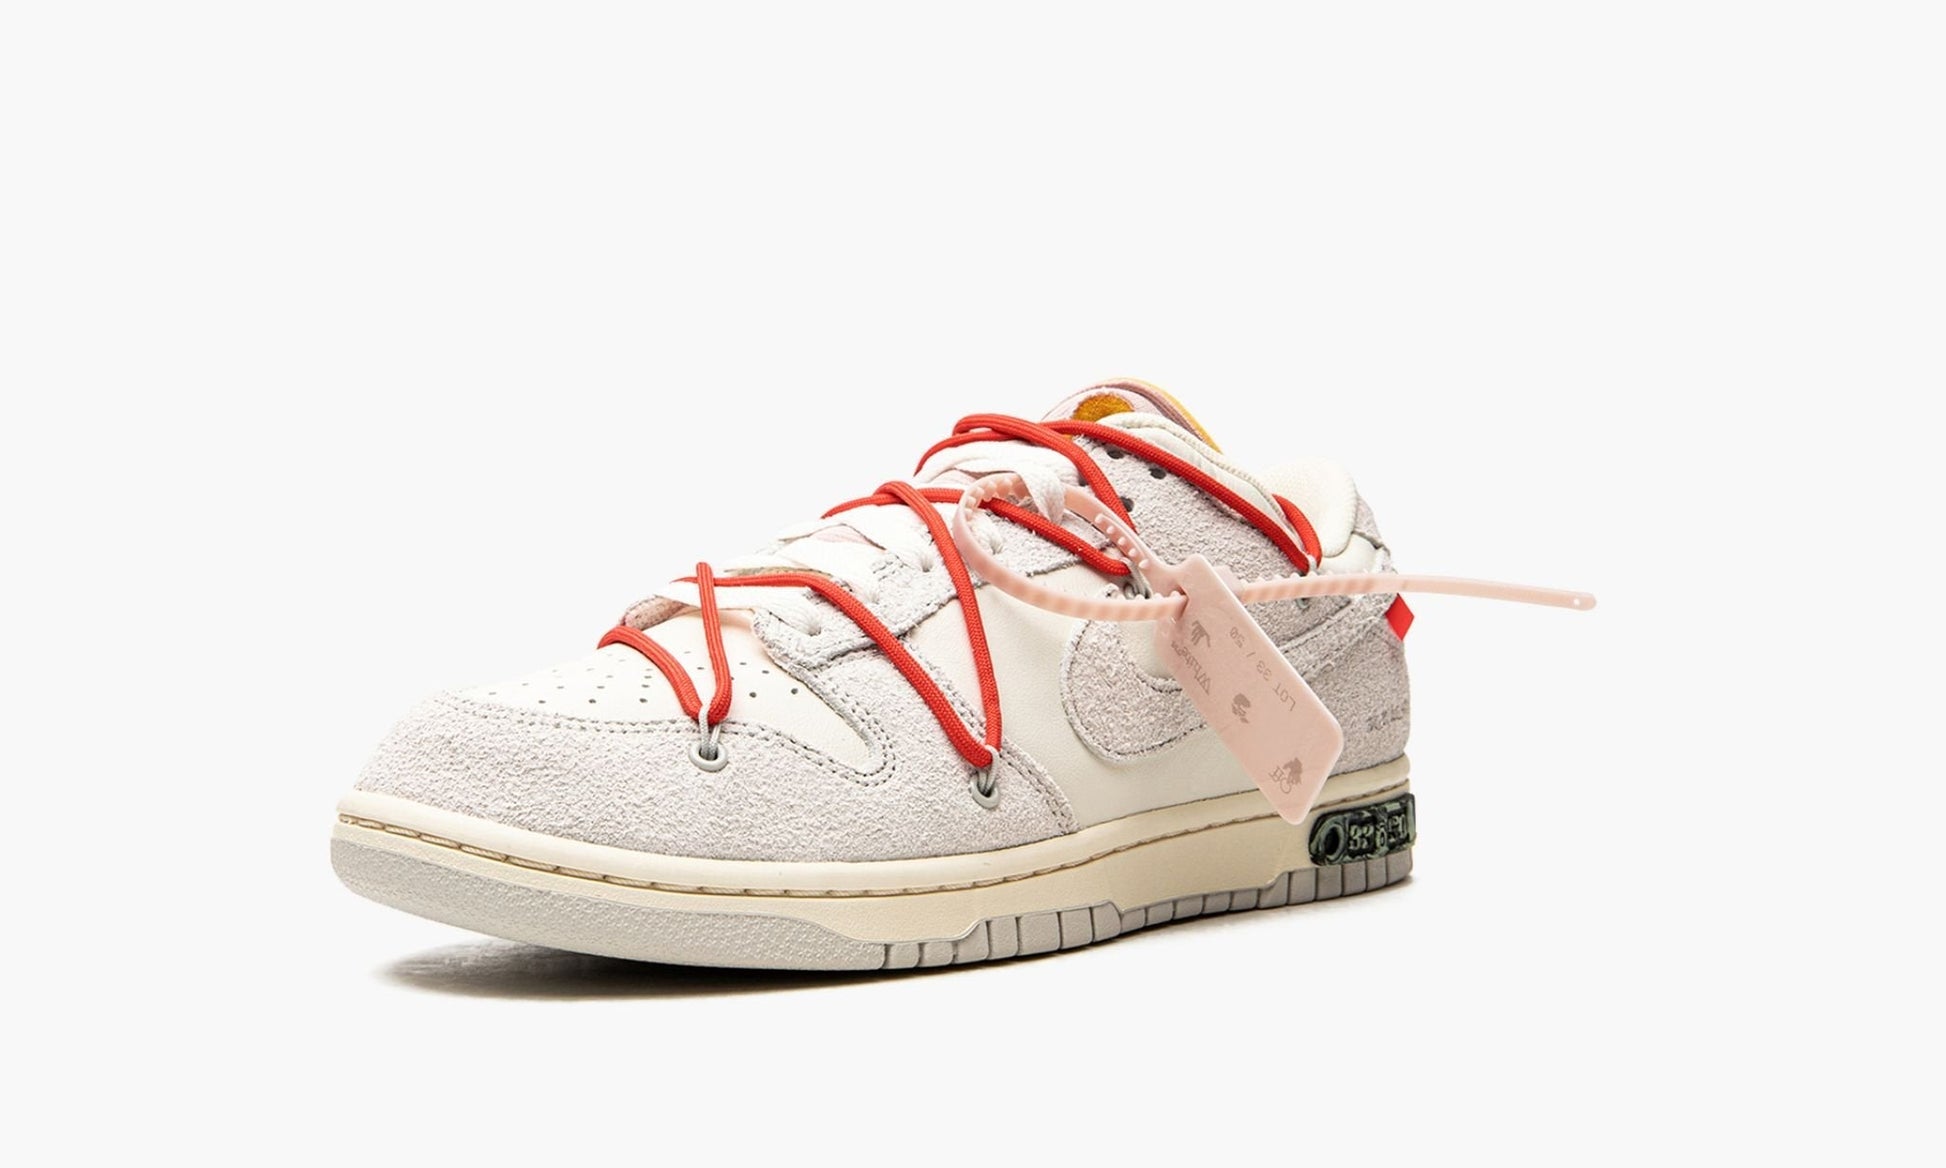 Dunk Low "Off-White - Lot 33"